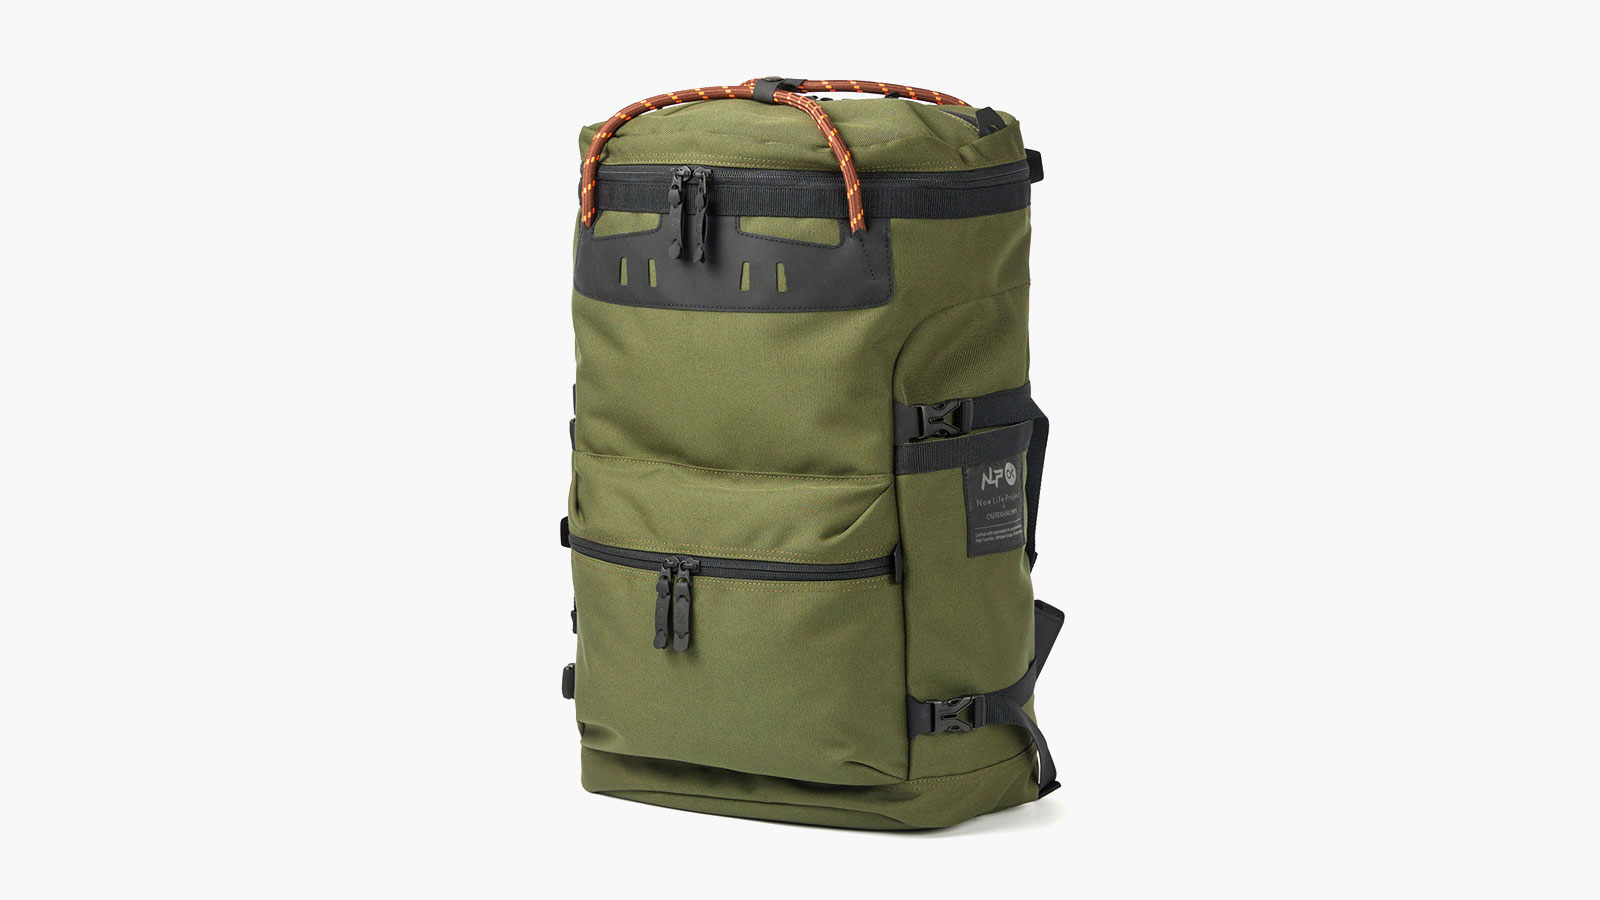 New Life Project x Outerknown Backpack